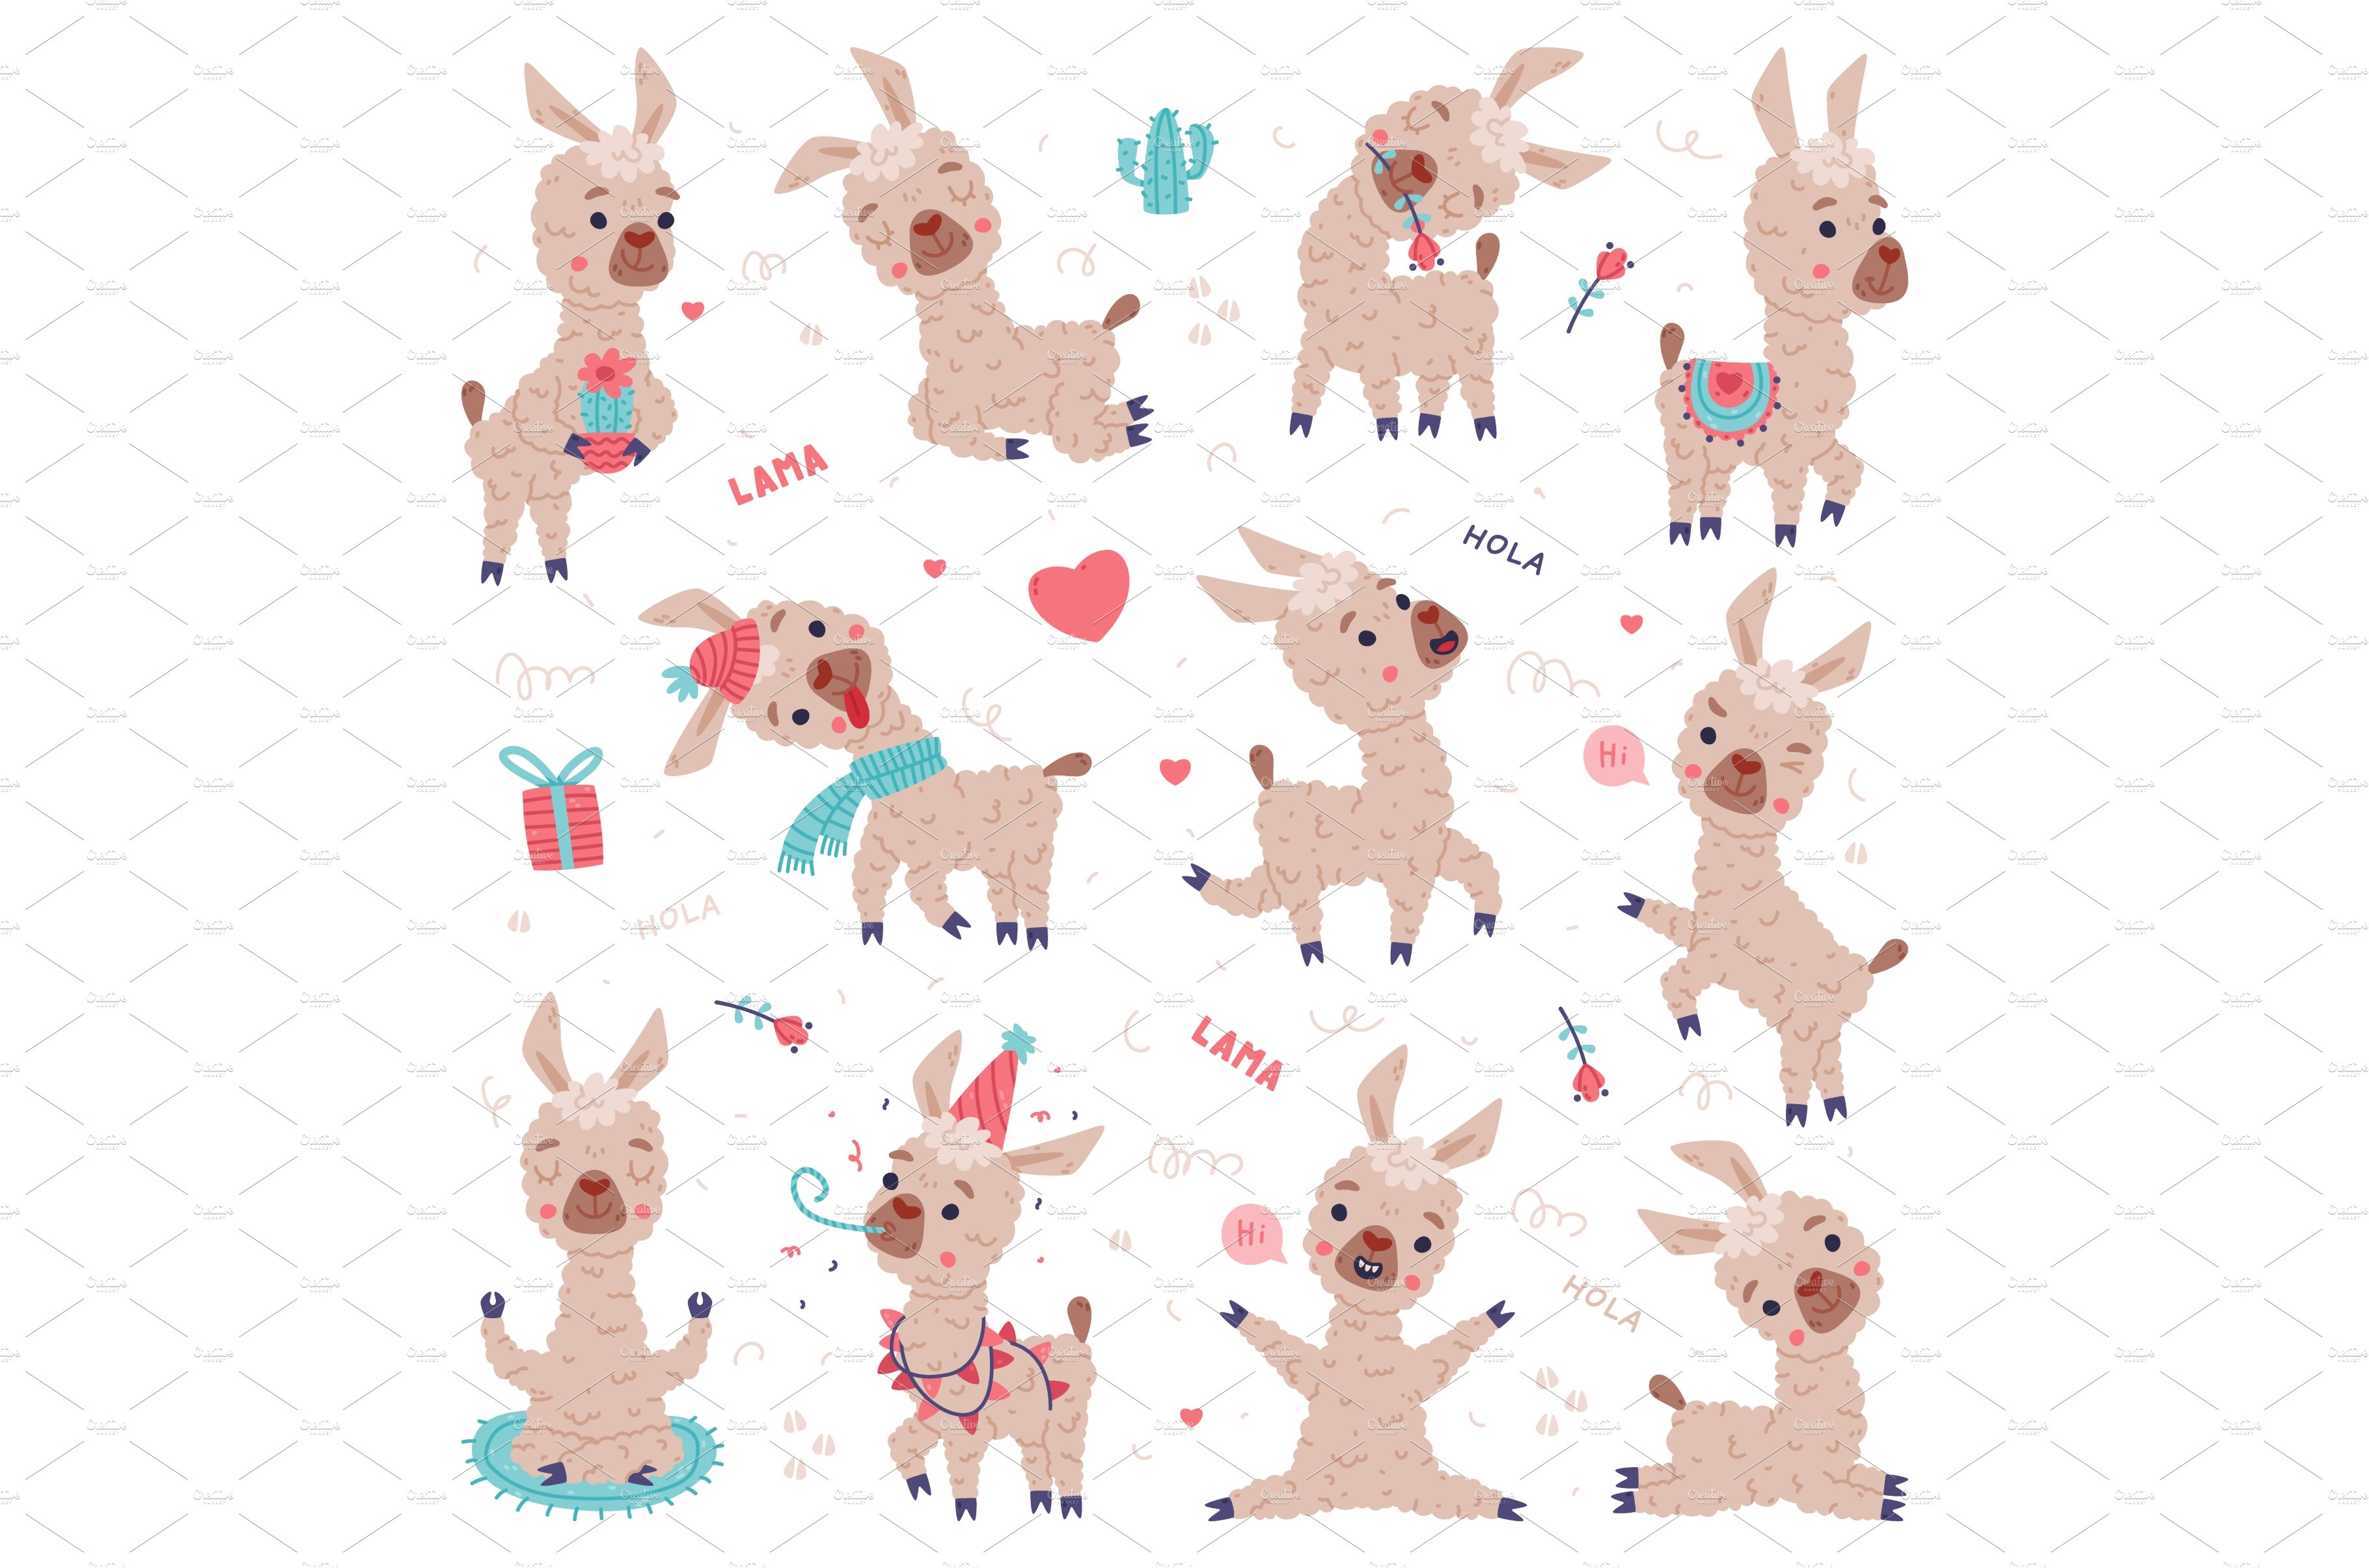 Cute baby llama in different poses cover image.